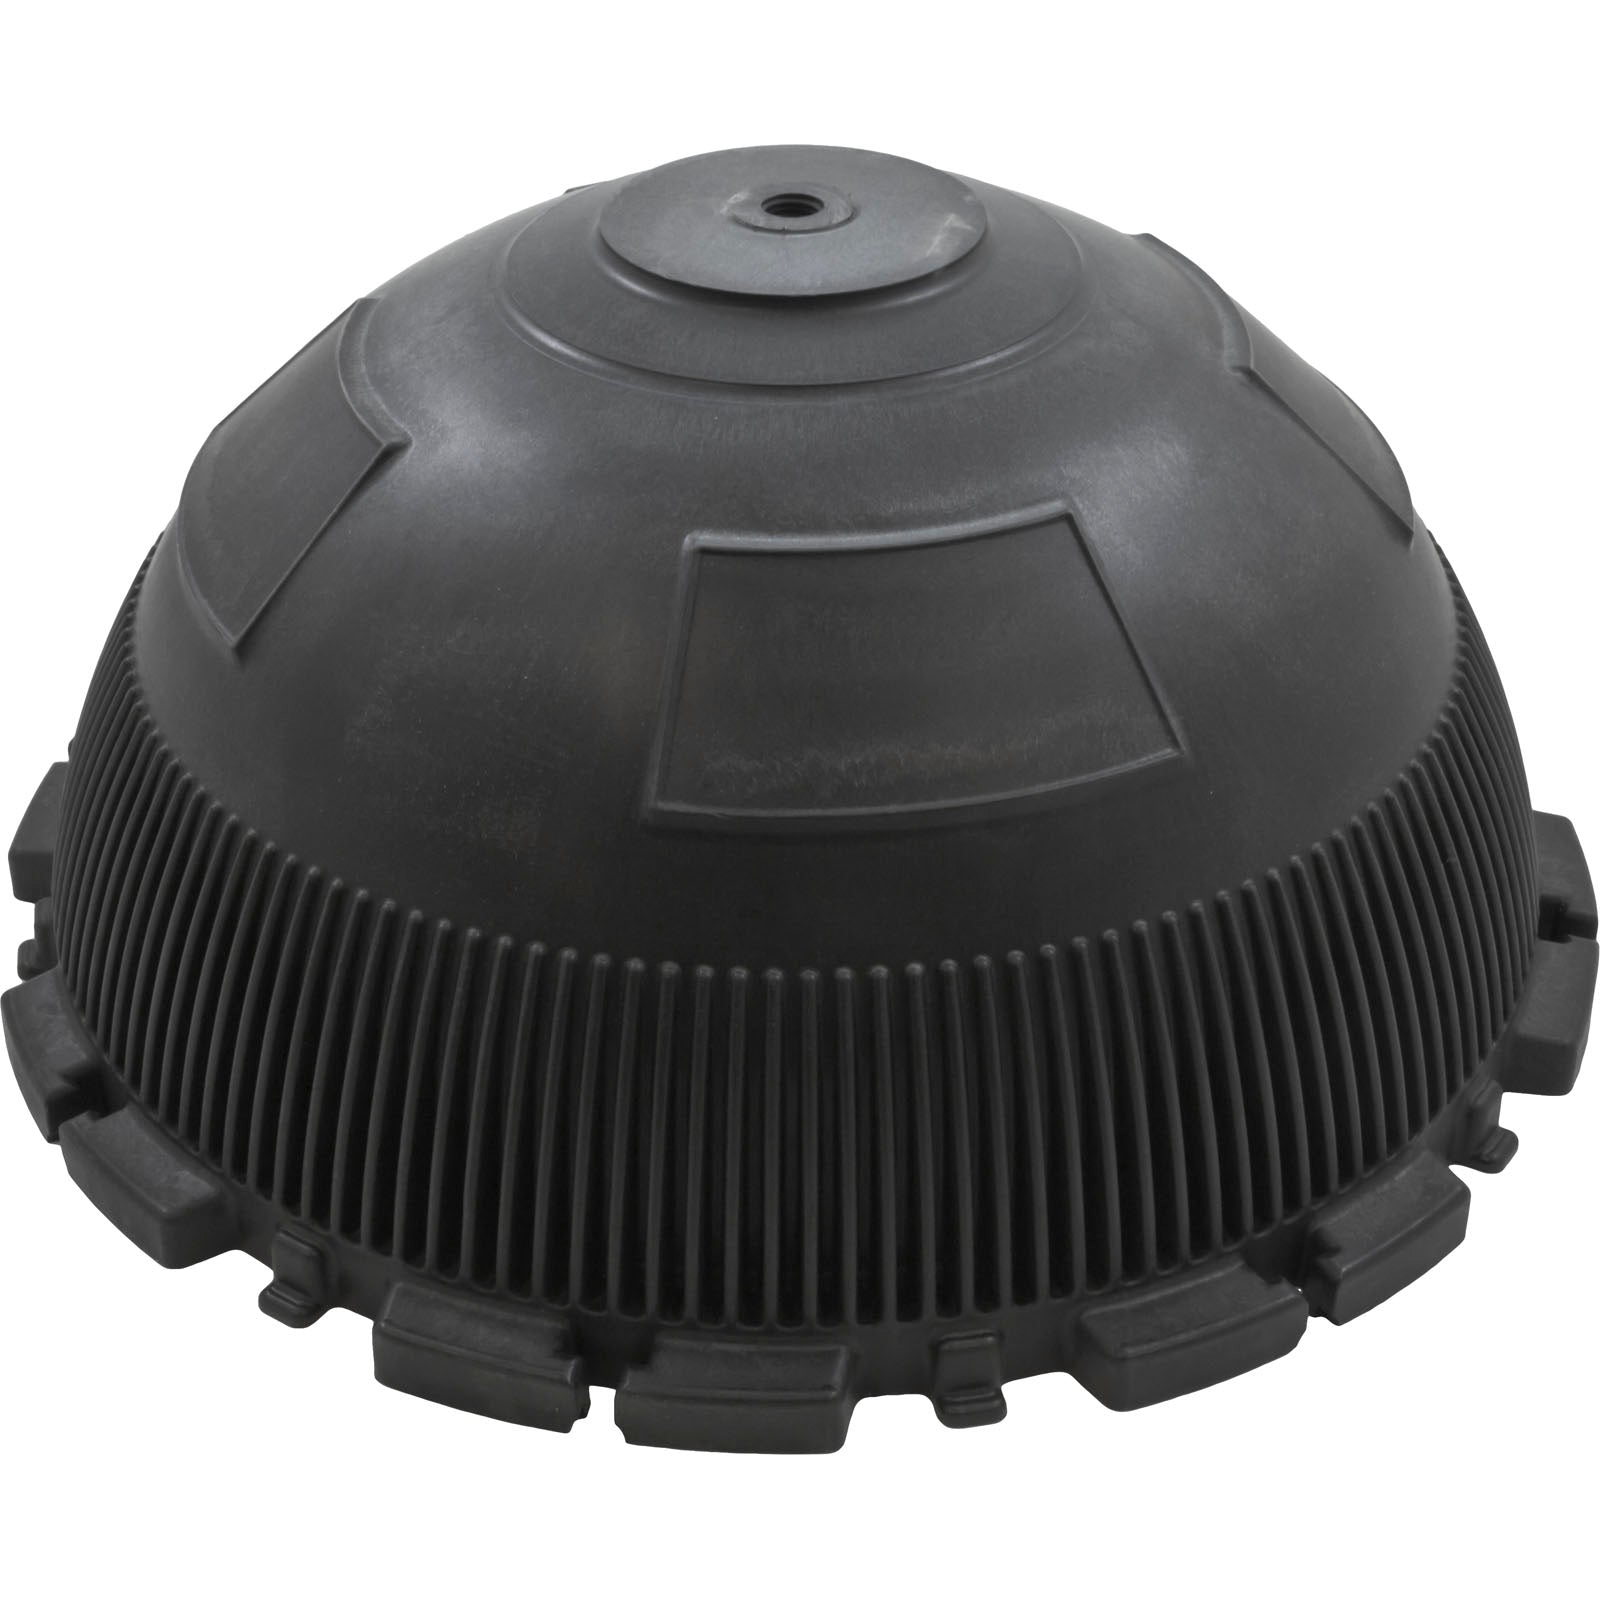 Tank Lid, Pentair Sta-Rite System 3, All S8 Models, 25"/ 24851-9001